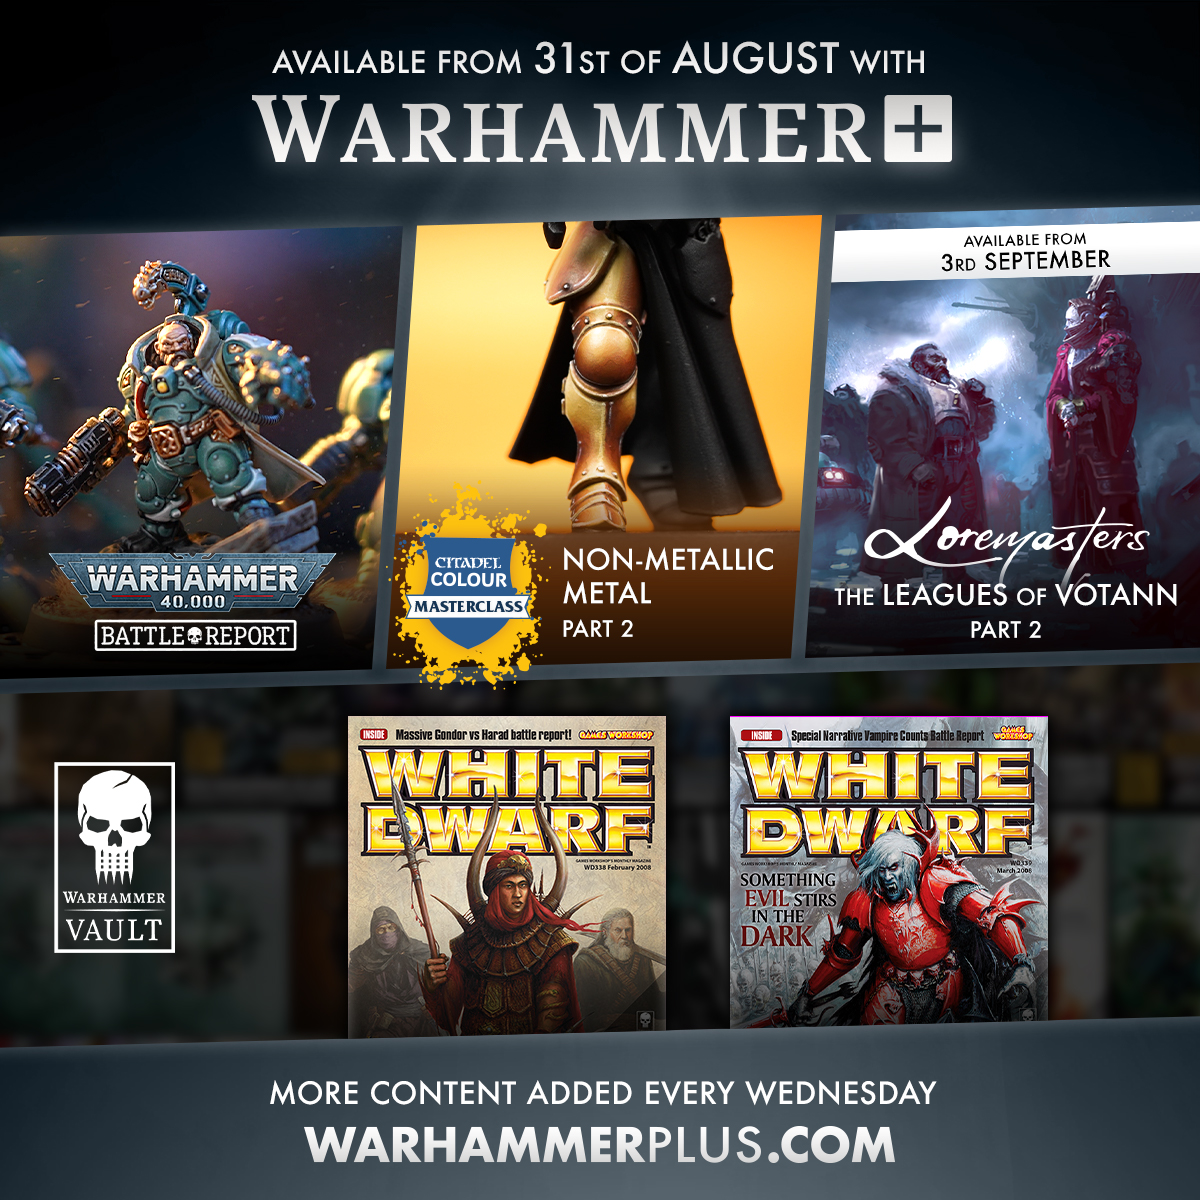 Games Workshop: Warhammer World - Tomorrow we celebrate the Warhammer World  Anniversary and we have the following items available to buy and the  rewards when you reach the spend threshold, we have